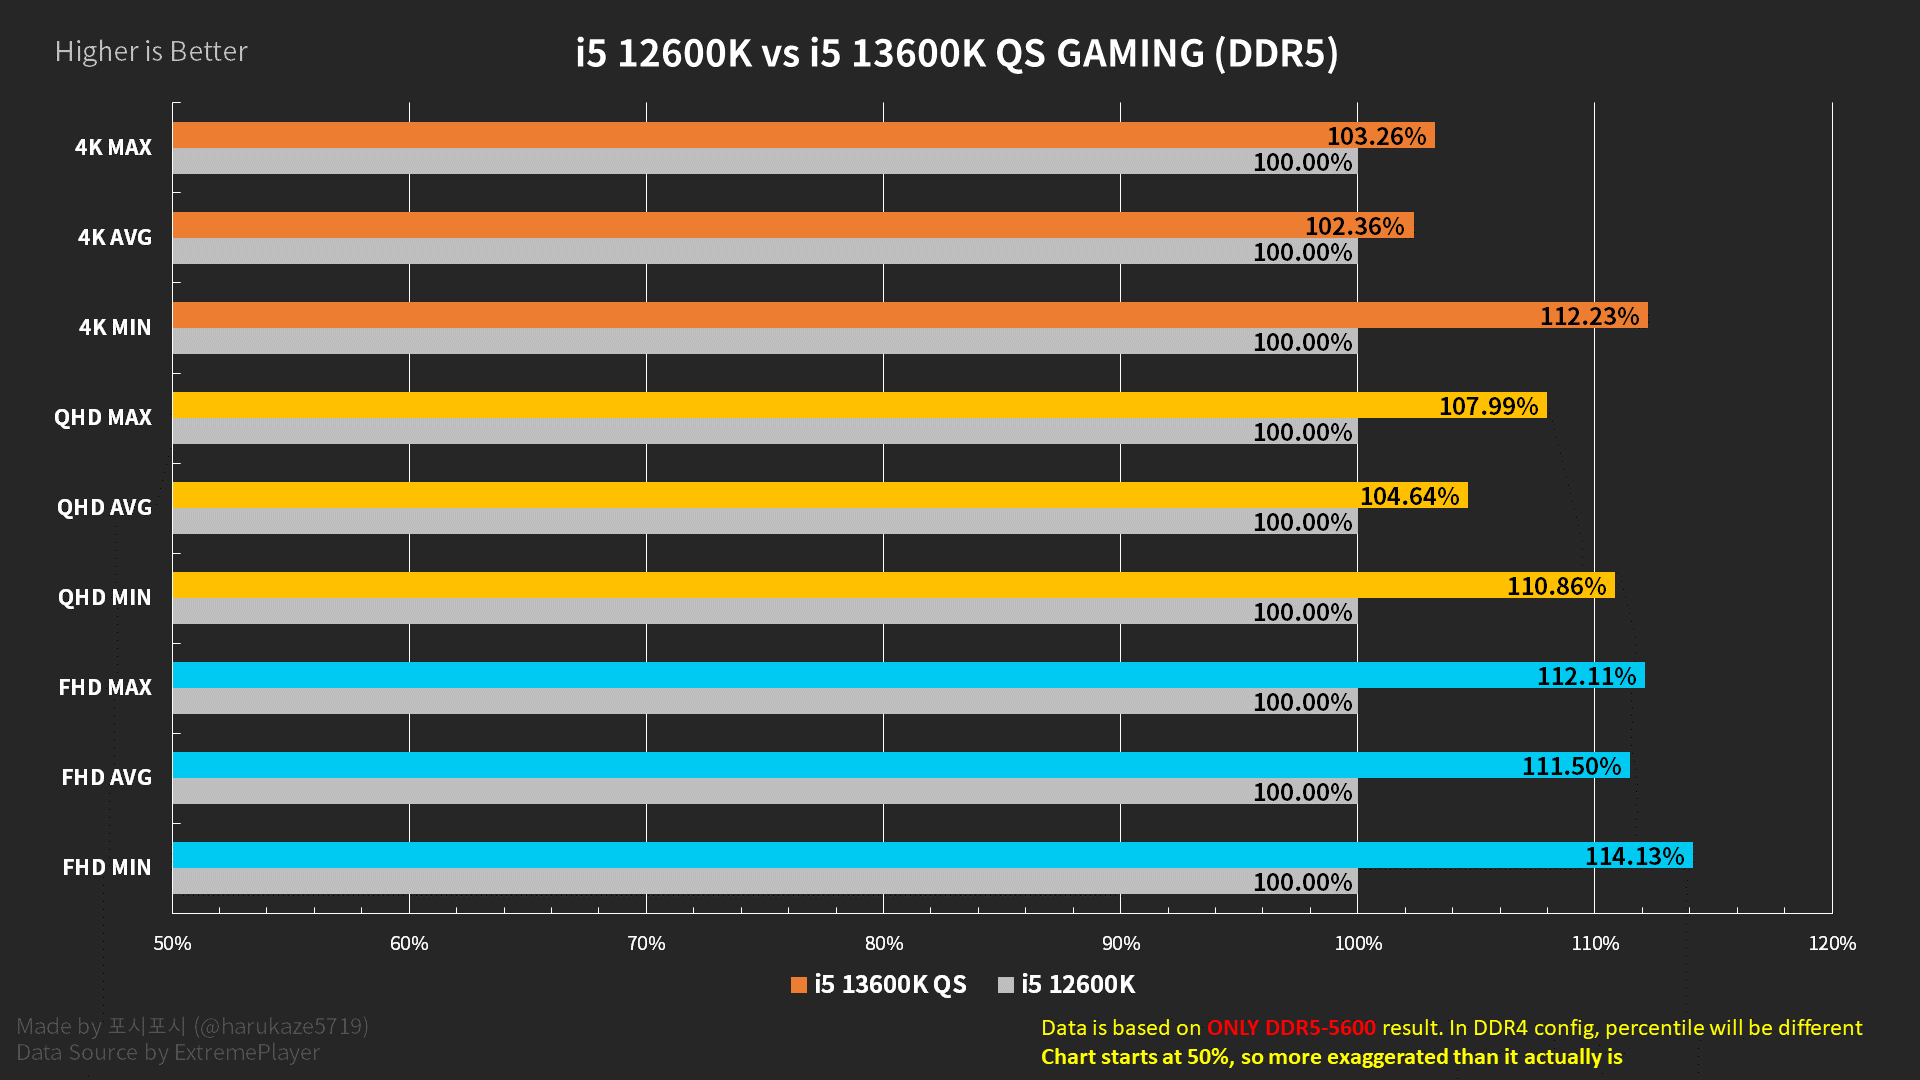 Core i5-12600K vs. Core i5-13600K (ES) with DDR4 and DDR5